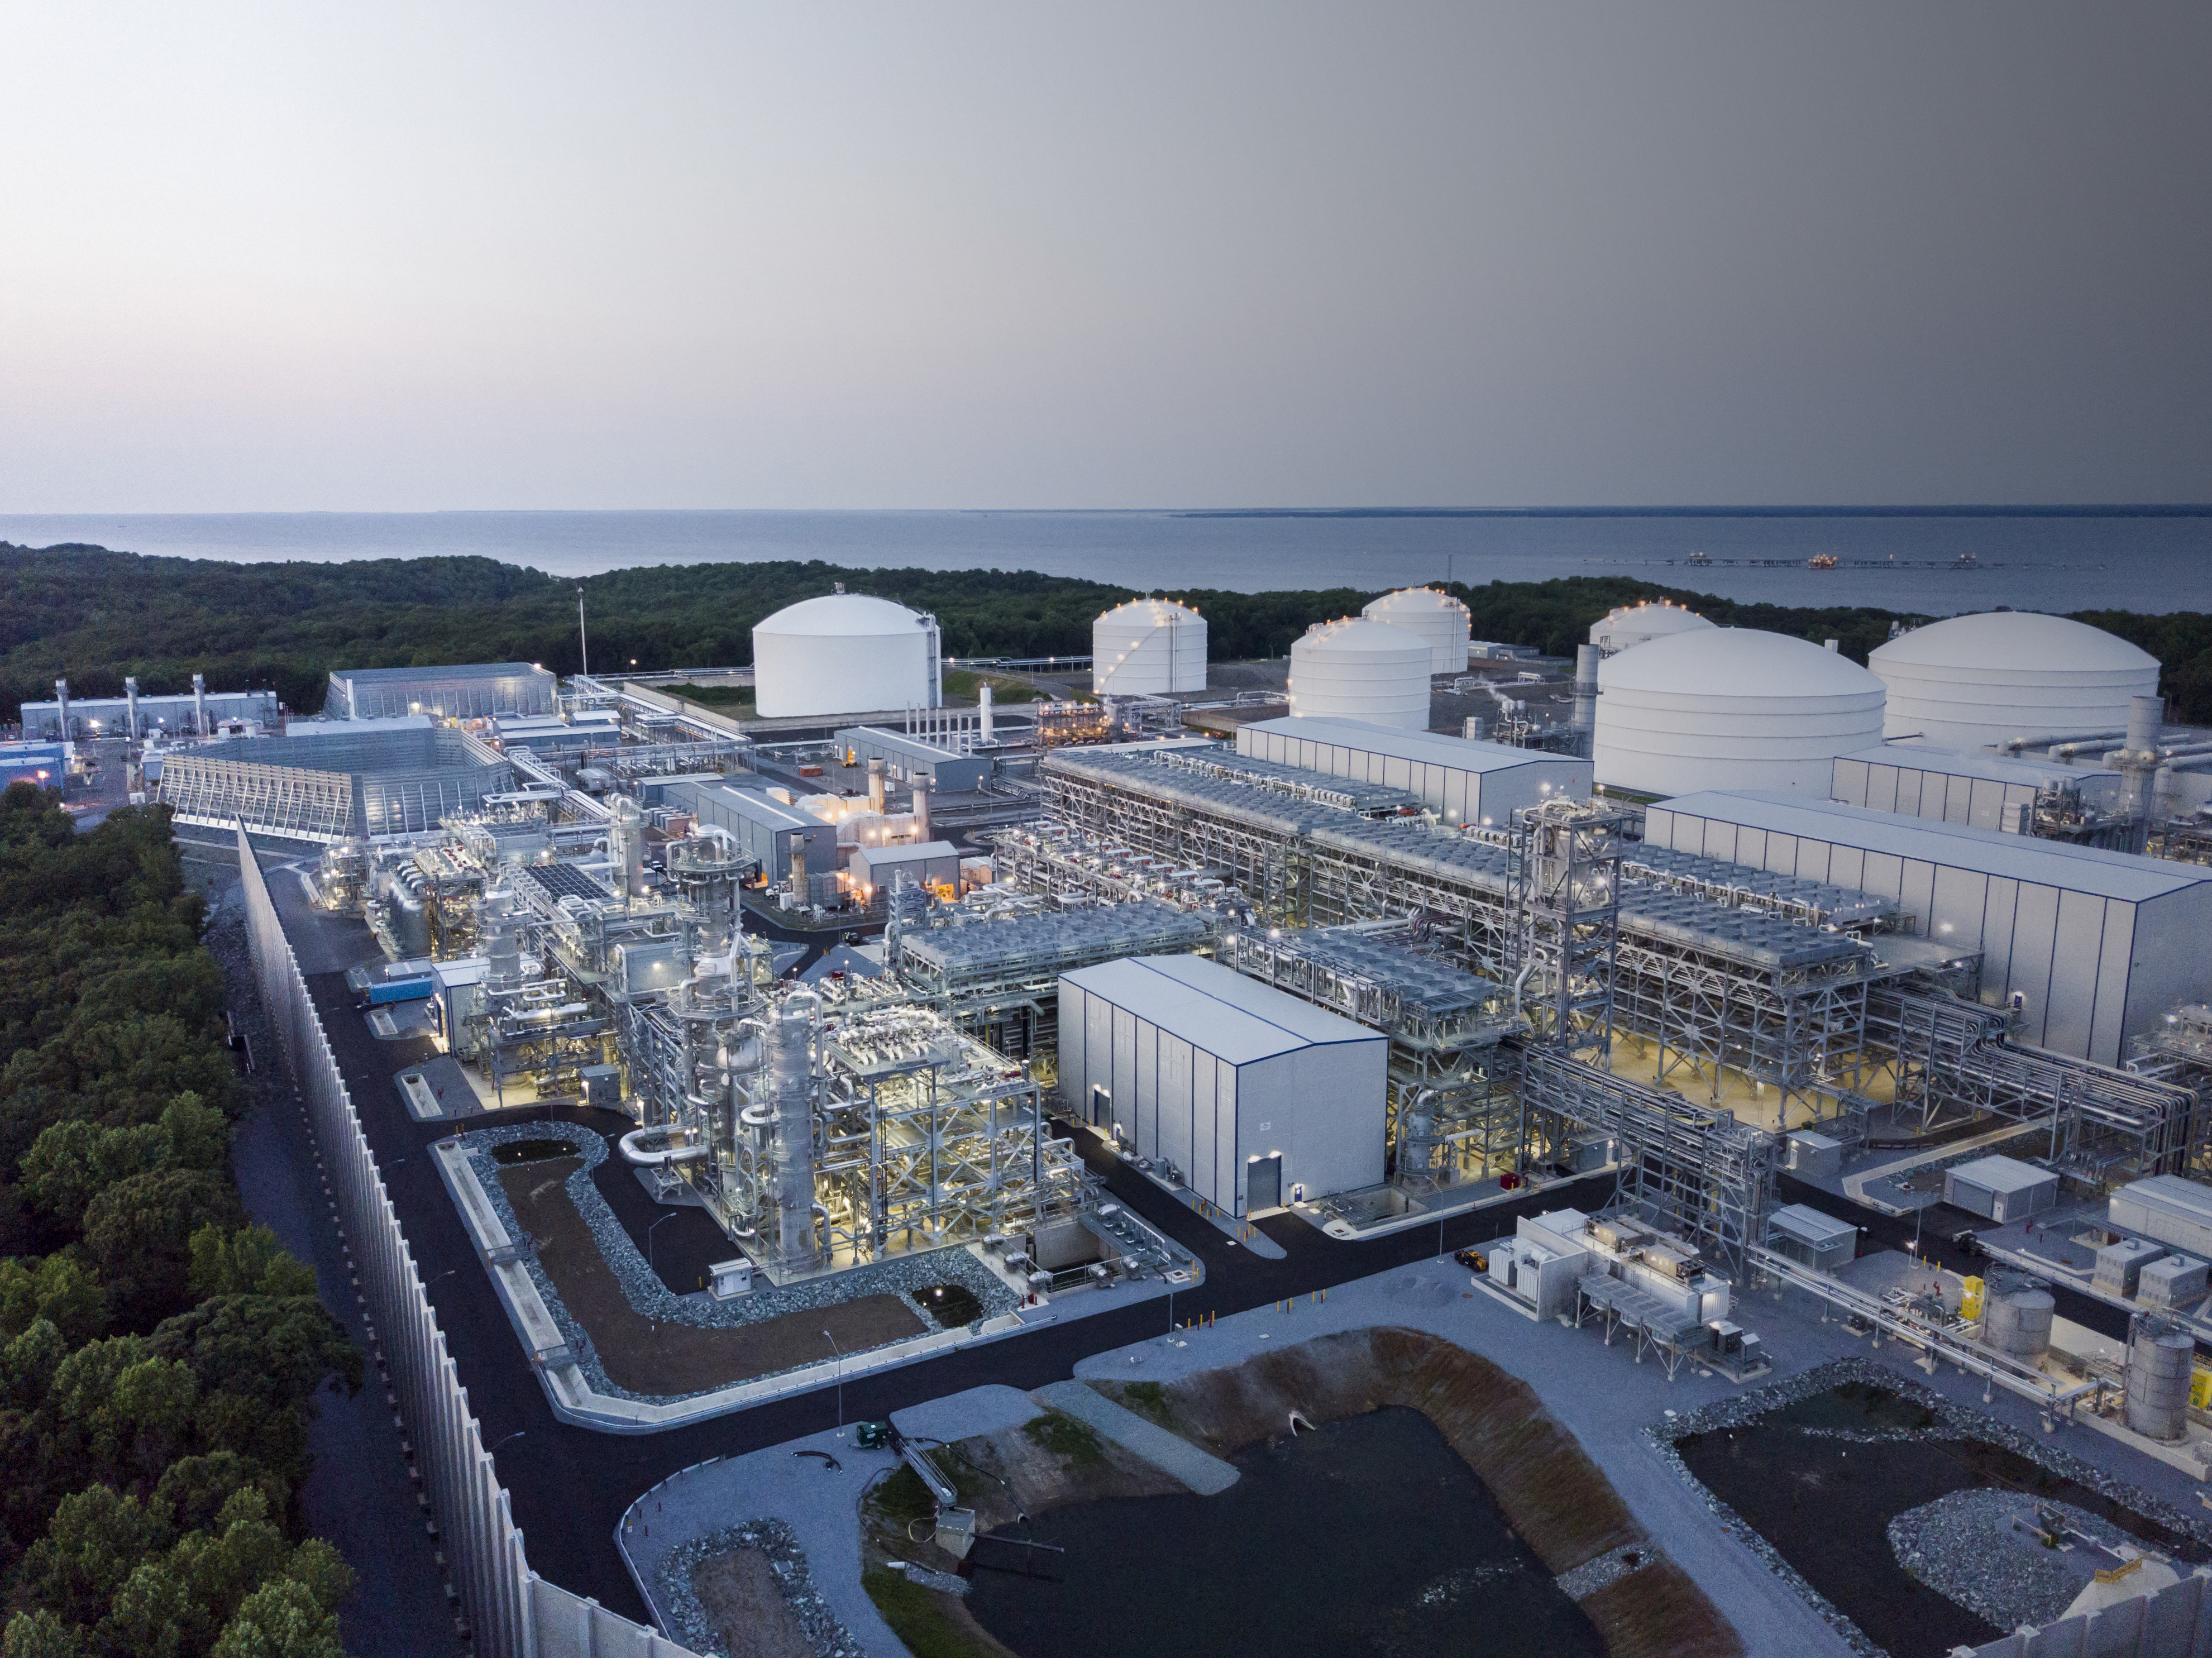 Dominion Energy’s Cove Point liquefaction facility liquefies natural gas for export to countries such as India and Japan that use natural gas to power their economies and generate low-carbon electricity. (Source: Kiewit)